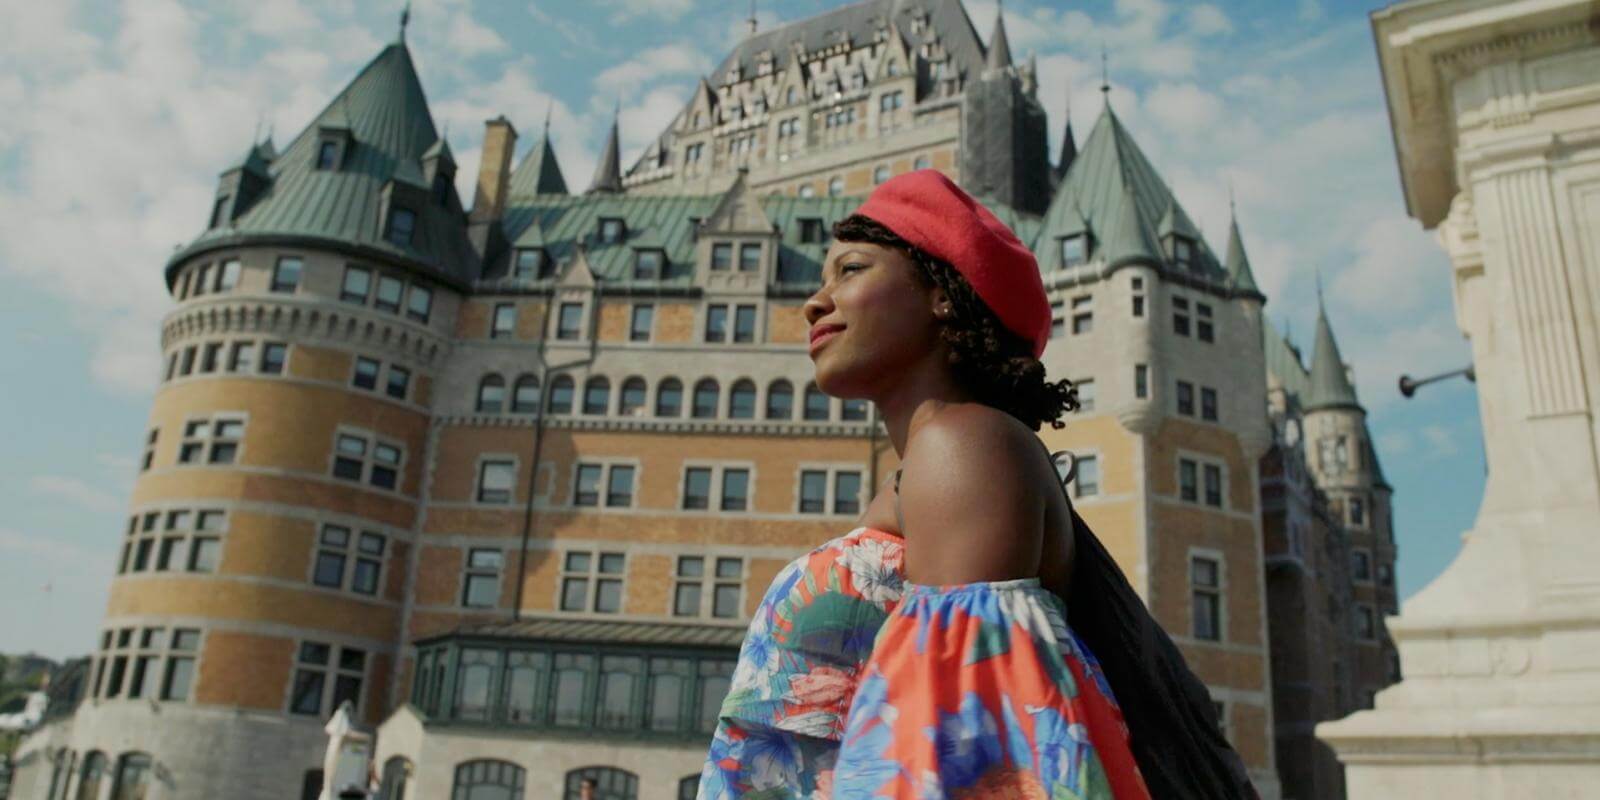 Oneika is walking in front of the Château Frontenac